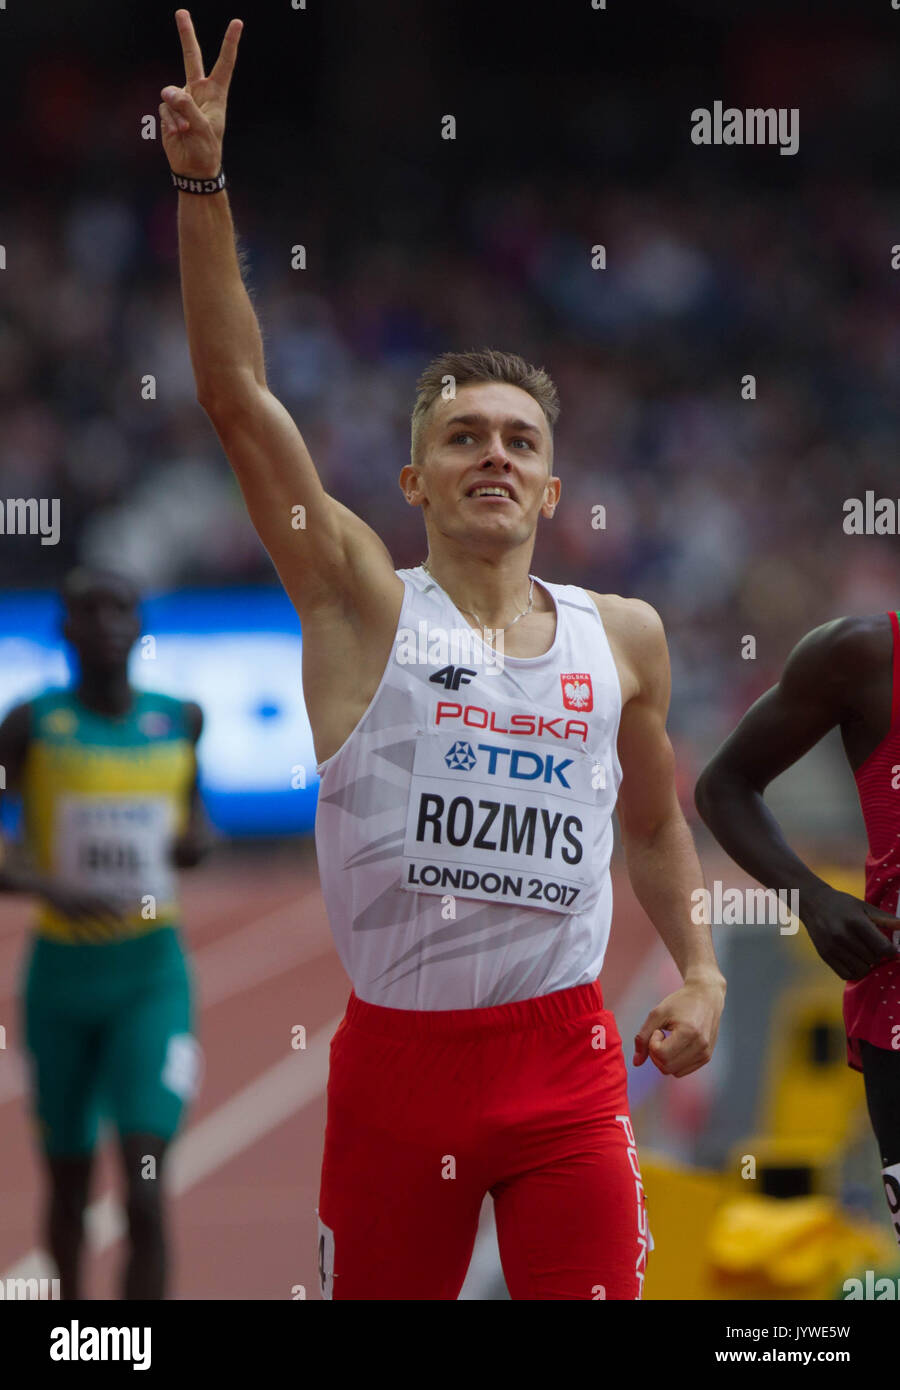 5 August 2017, London Stadium, East London, England; IAAF World Championships, Day2;   Michal Rozmys 4nd series of 800 men Stock Photo